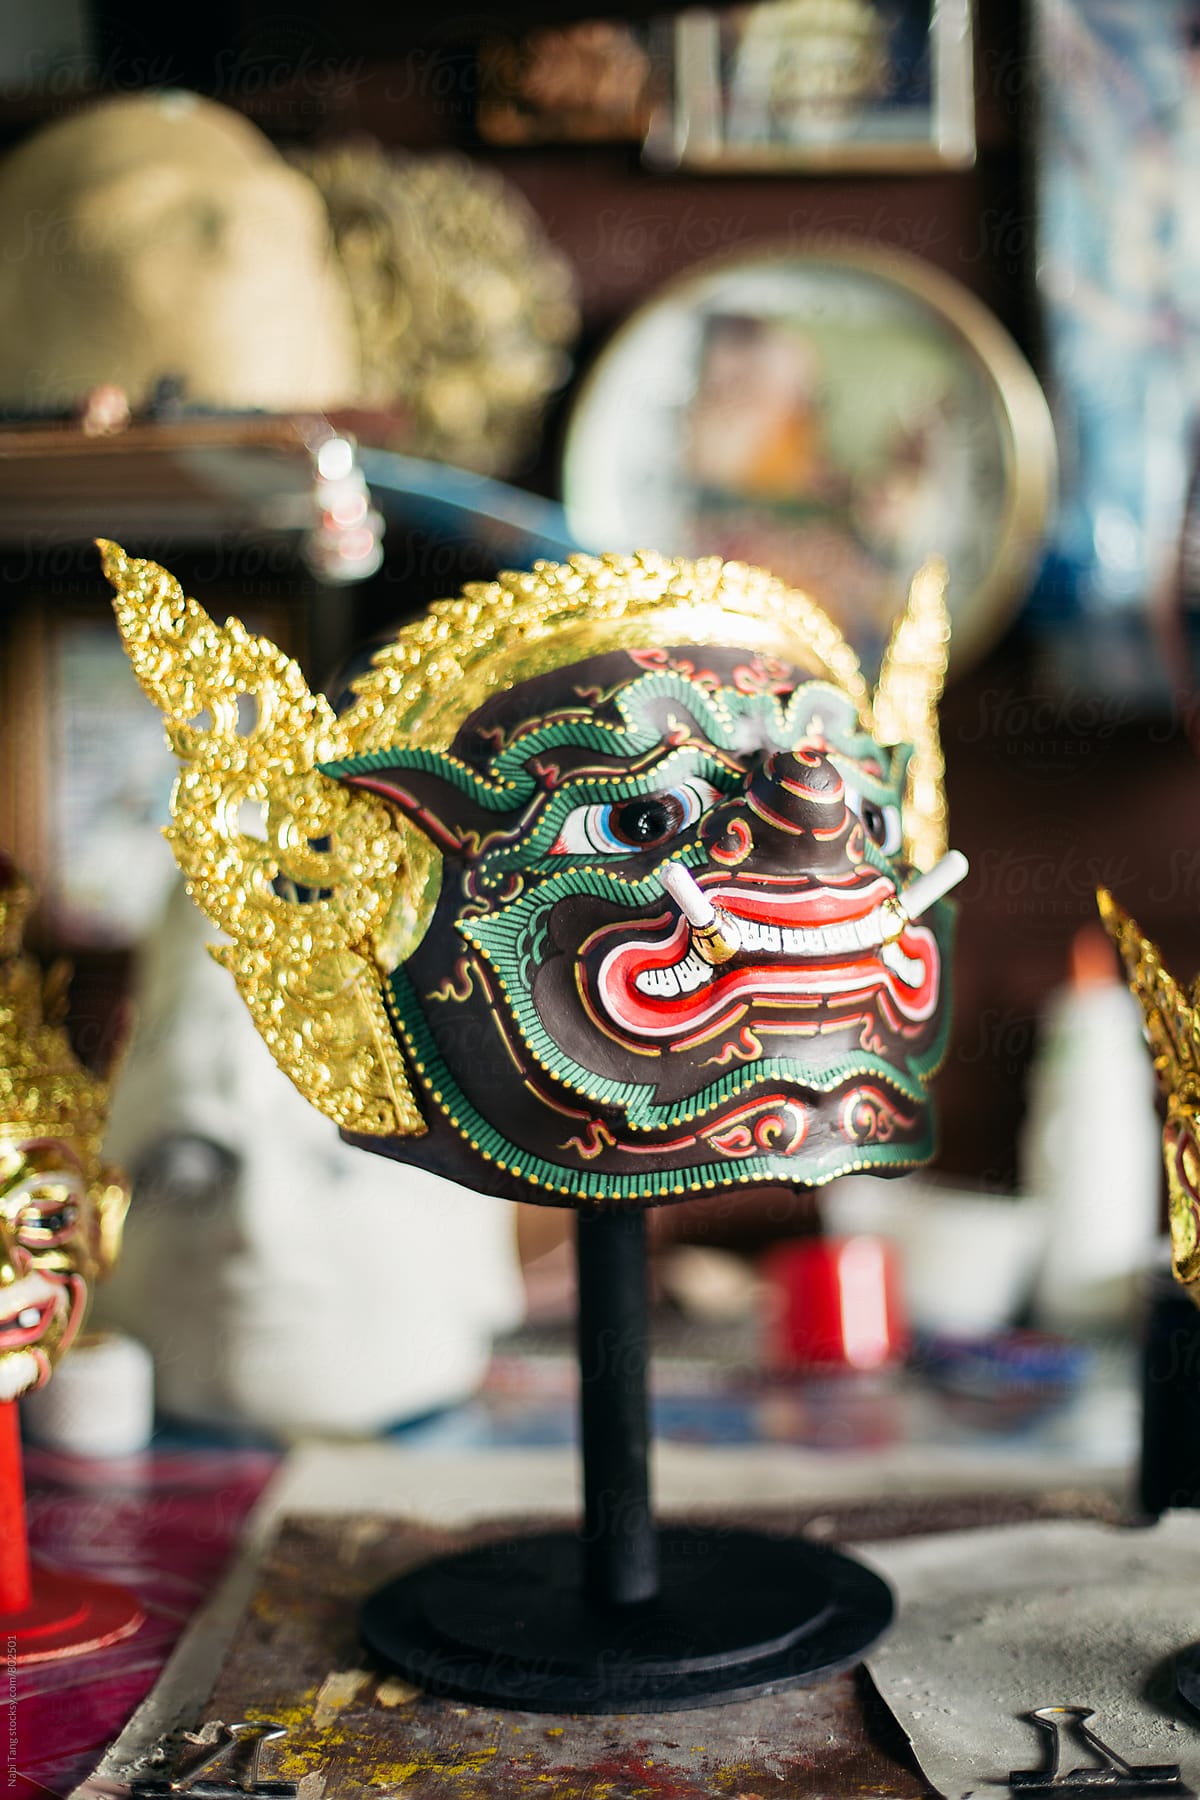 Hand painted 'Phra Phirap' mask for Thai traditional royal stage theater